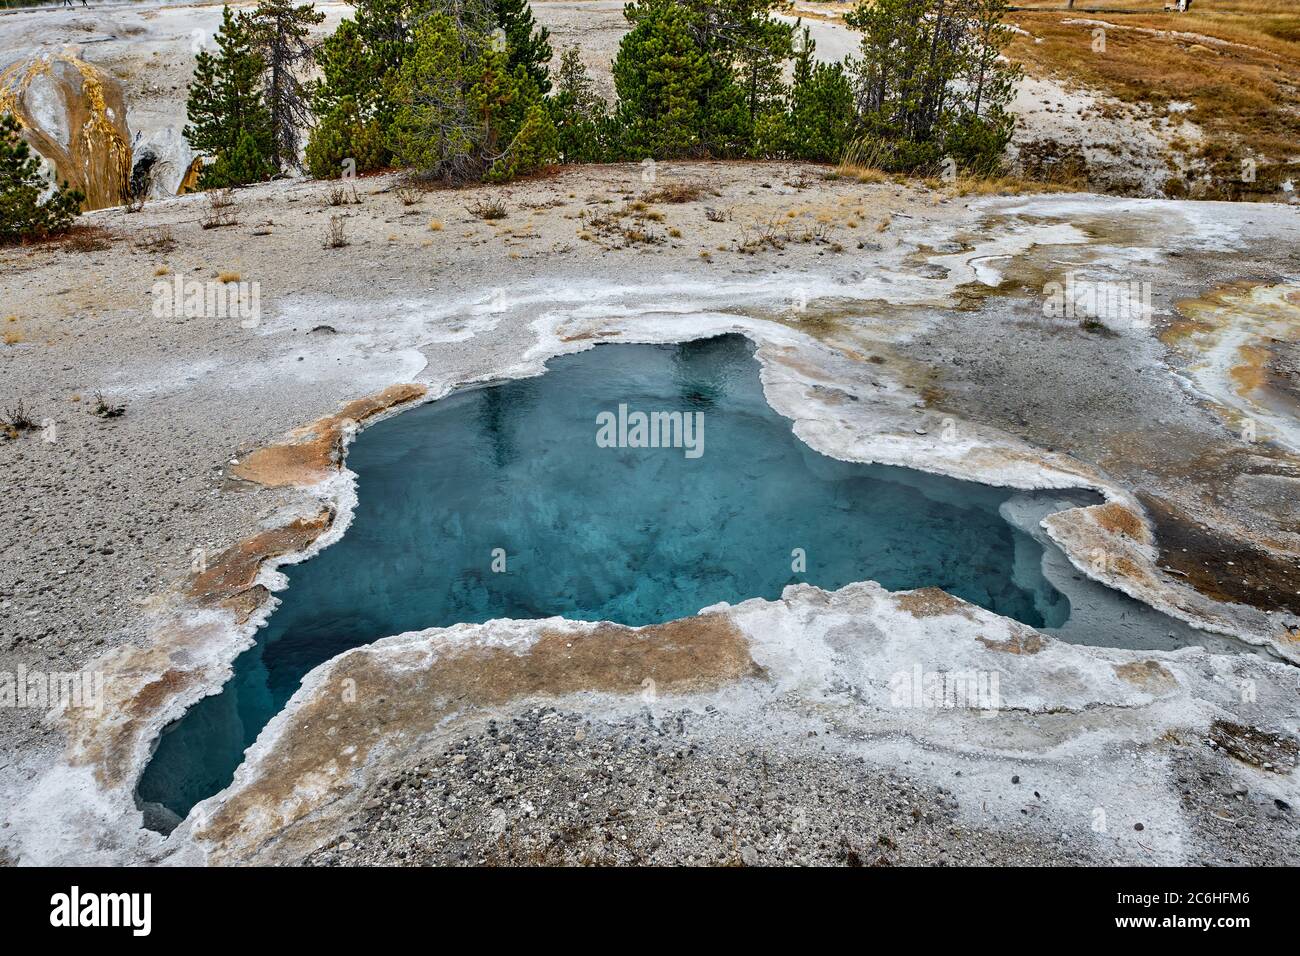 Blue star spring in Yellowstone national park, USA Stock Photo